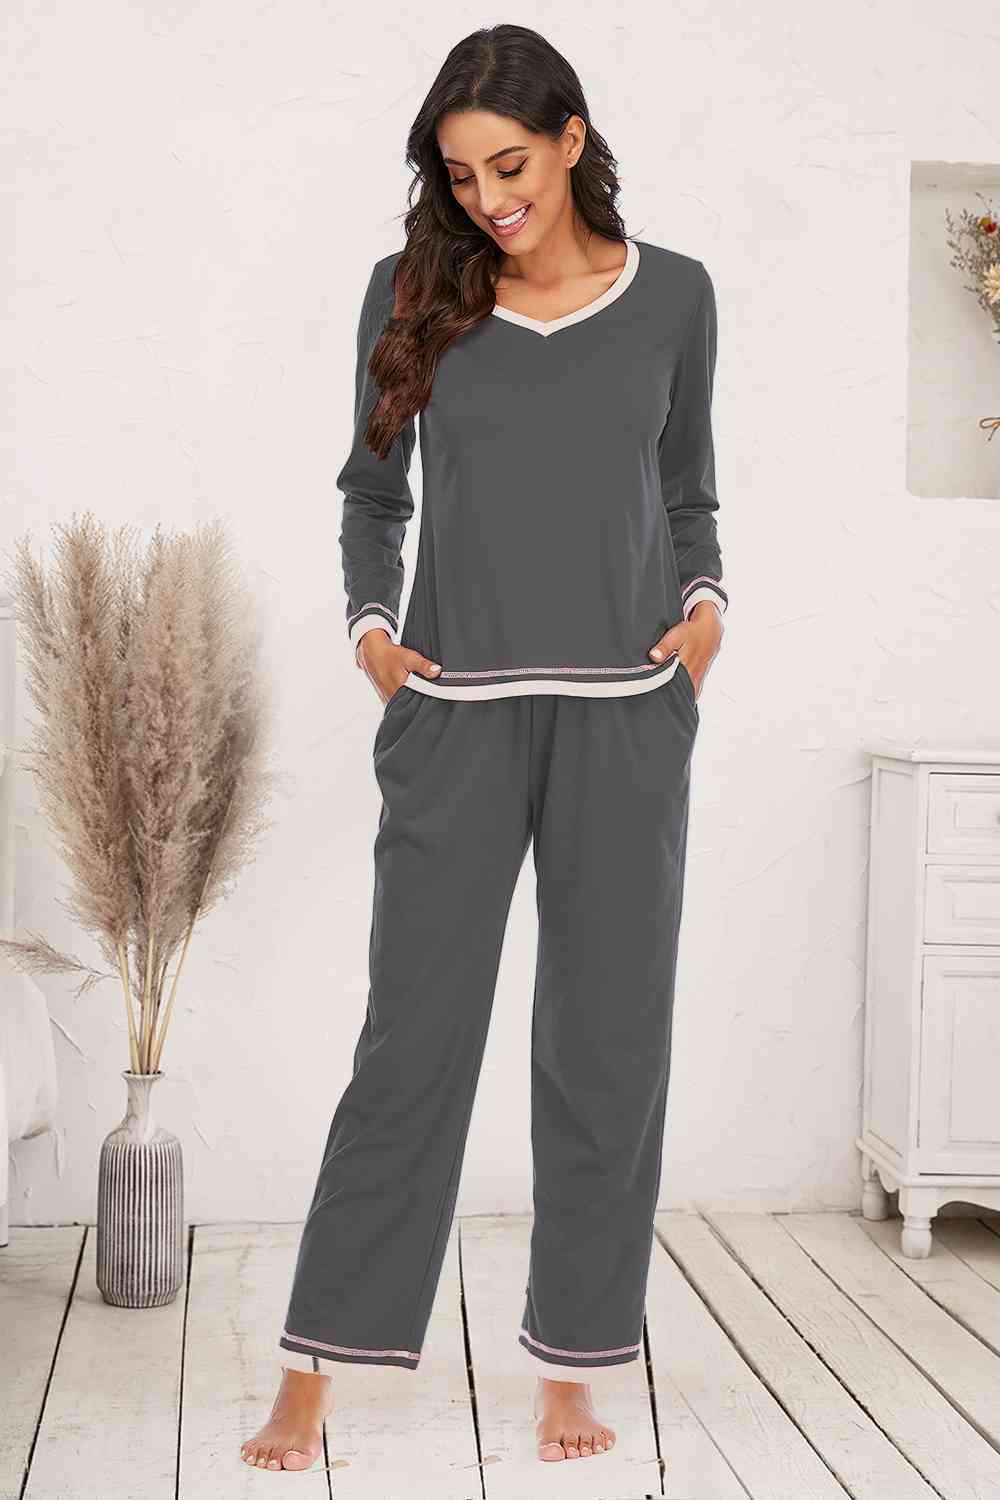 V-Neck Top and Pants Lounge Set (3 Colors) Loungewear Krazy Heart Designs Boutique Charcoal S 